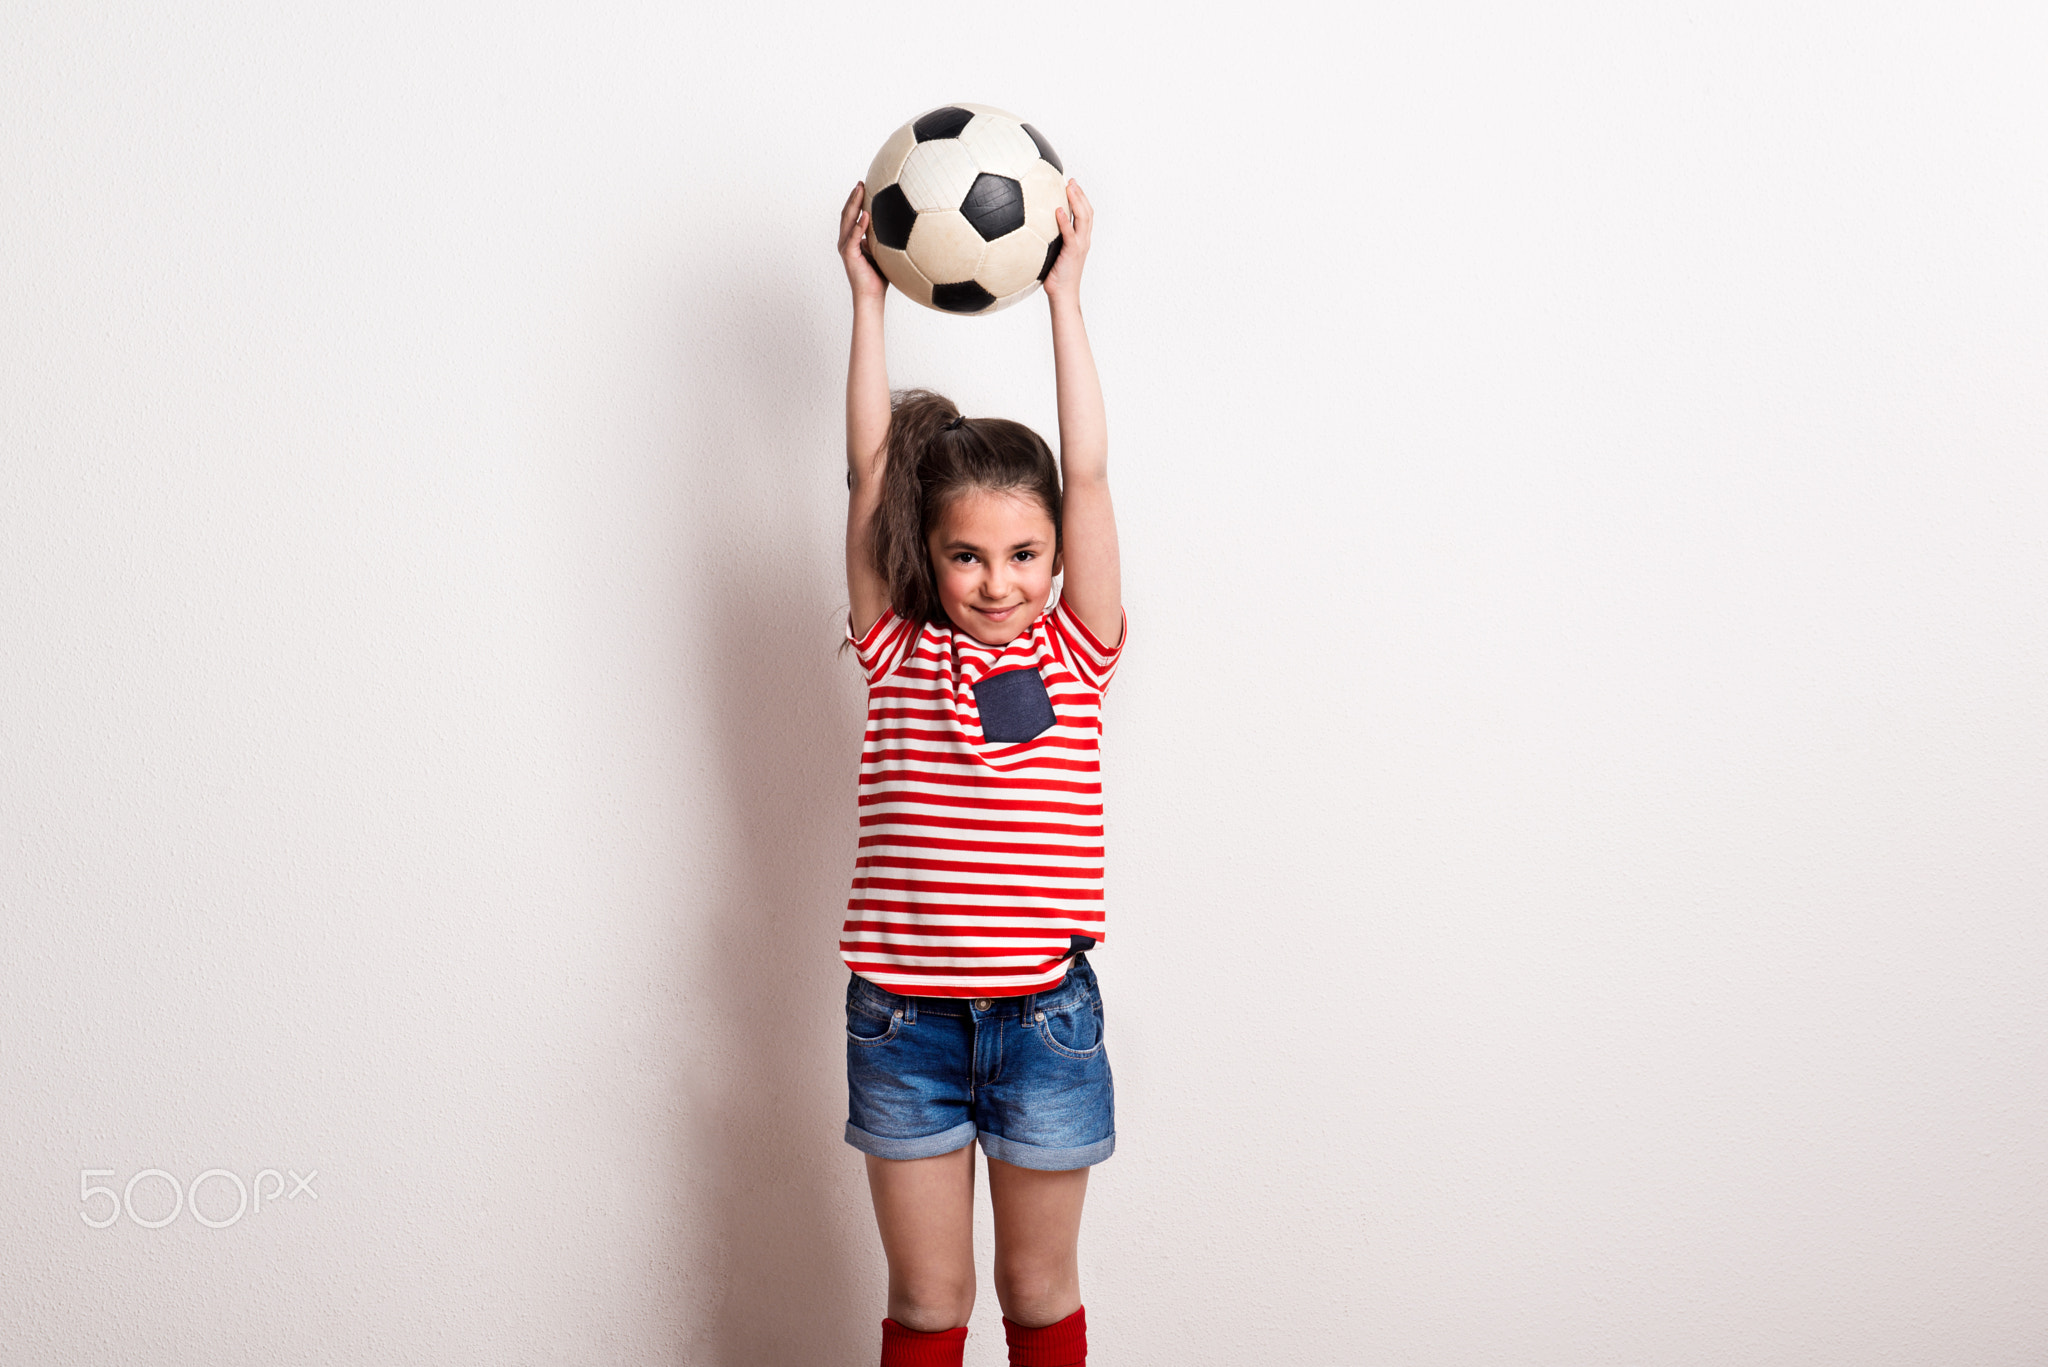 A small girl with a soccer ball and striped T-shirt standing in a studio.